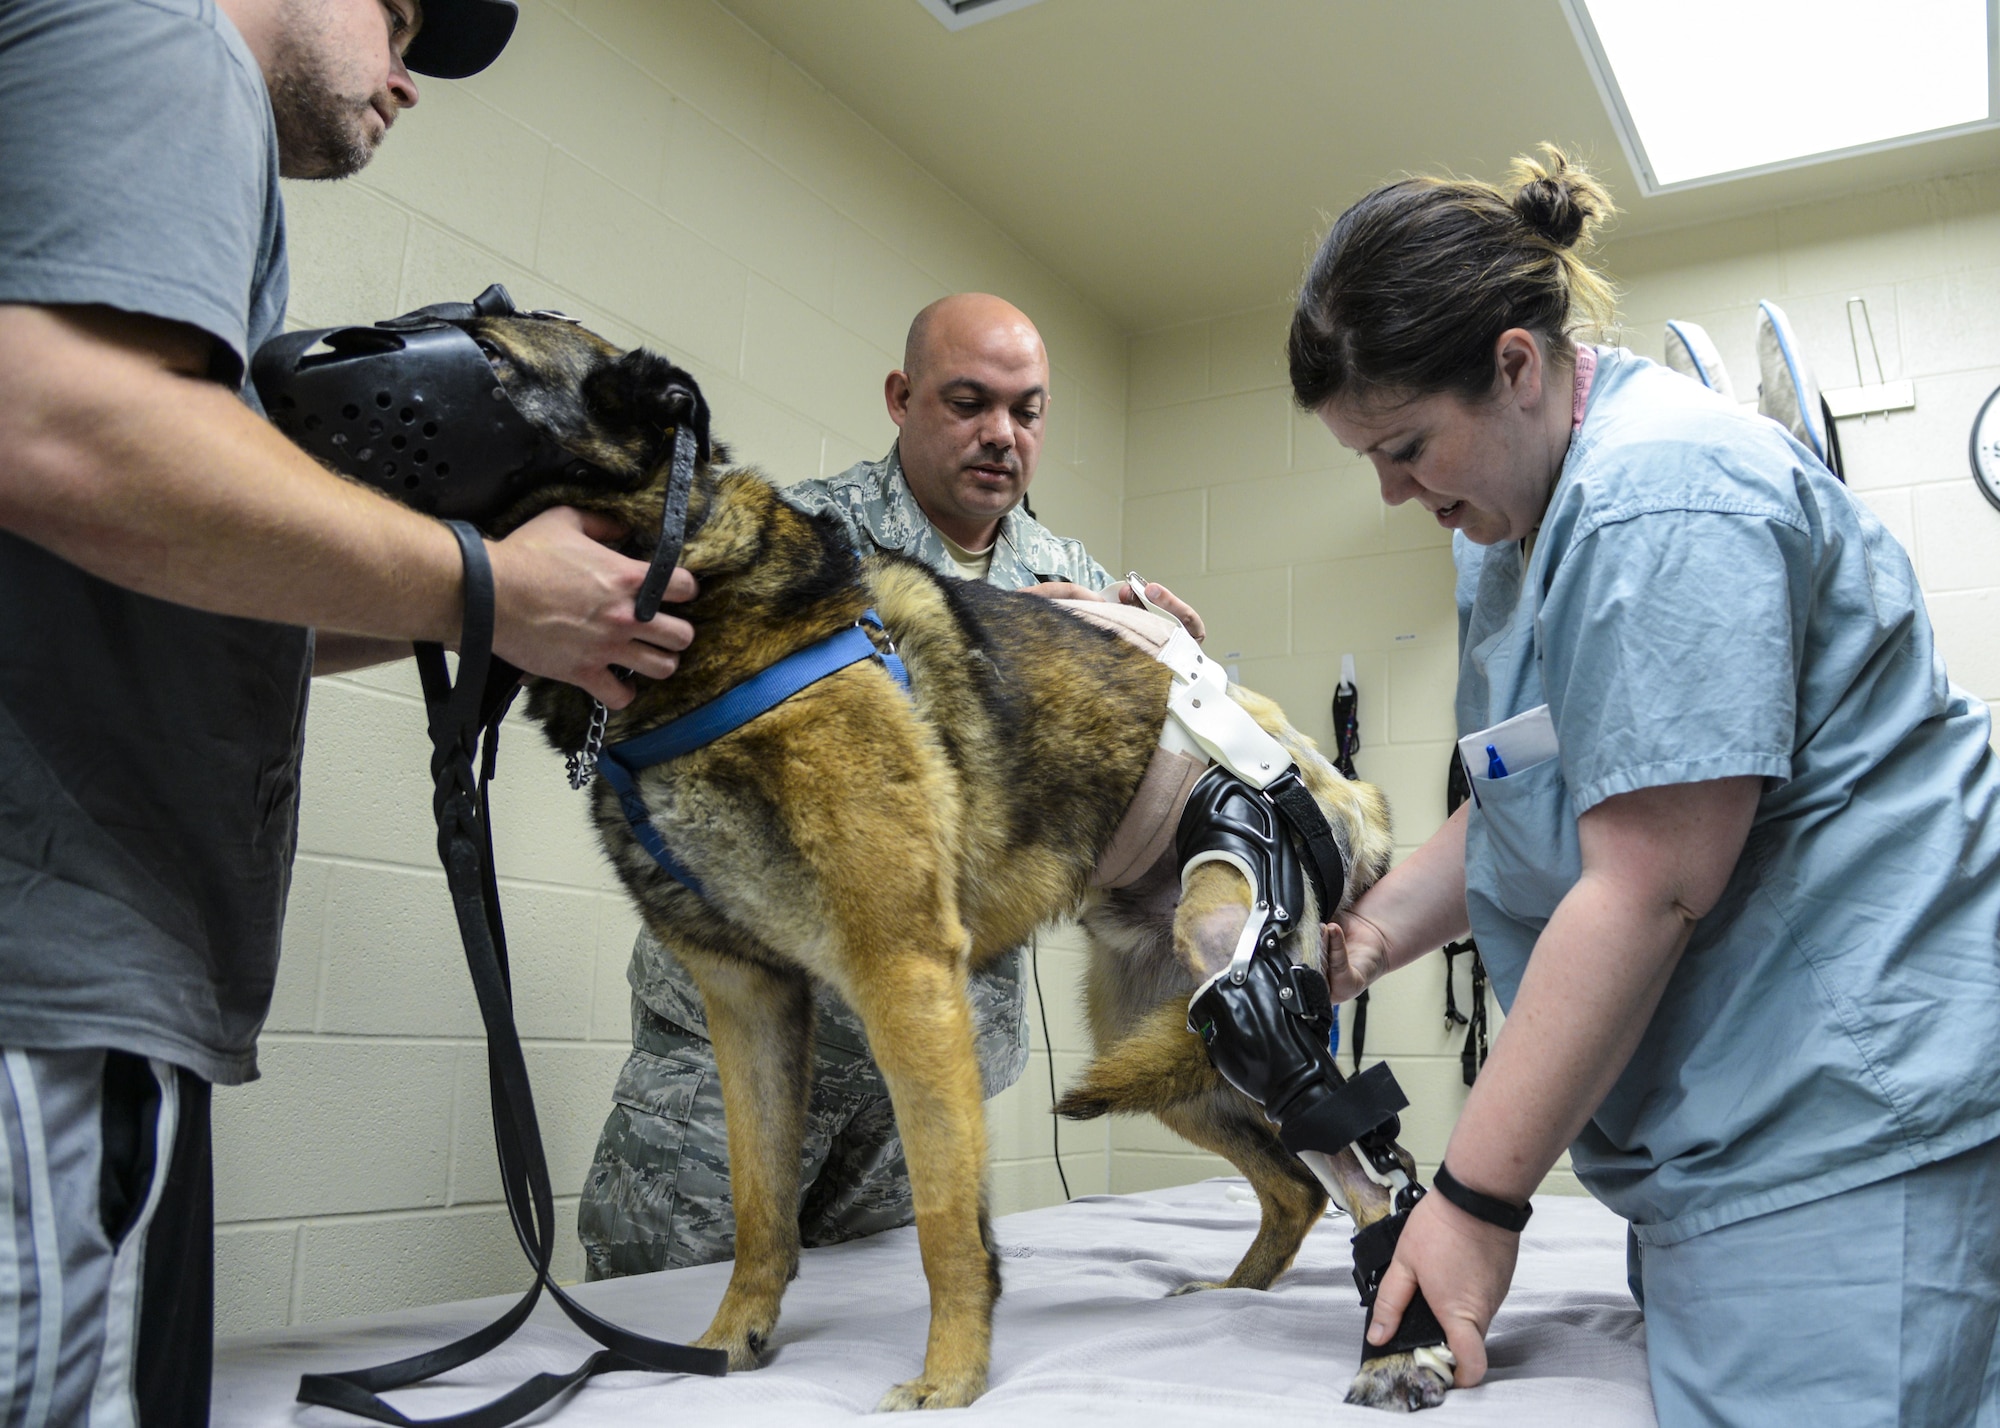 Military Working Dog SStash stands for the first time on his new outfitted leg brace at LTC Daniel E. Holland Memorial Military Working Dog Hospital at Joint Base San Antonio-Lackland, Texas, April 2, 2015. Previously, SStash has been unable to put weight on his injured leg, so the leg brace will help speed his recovery.